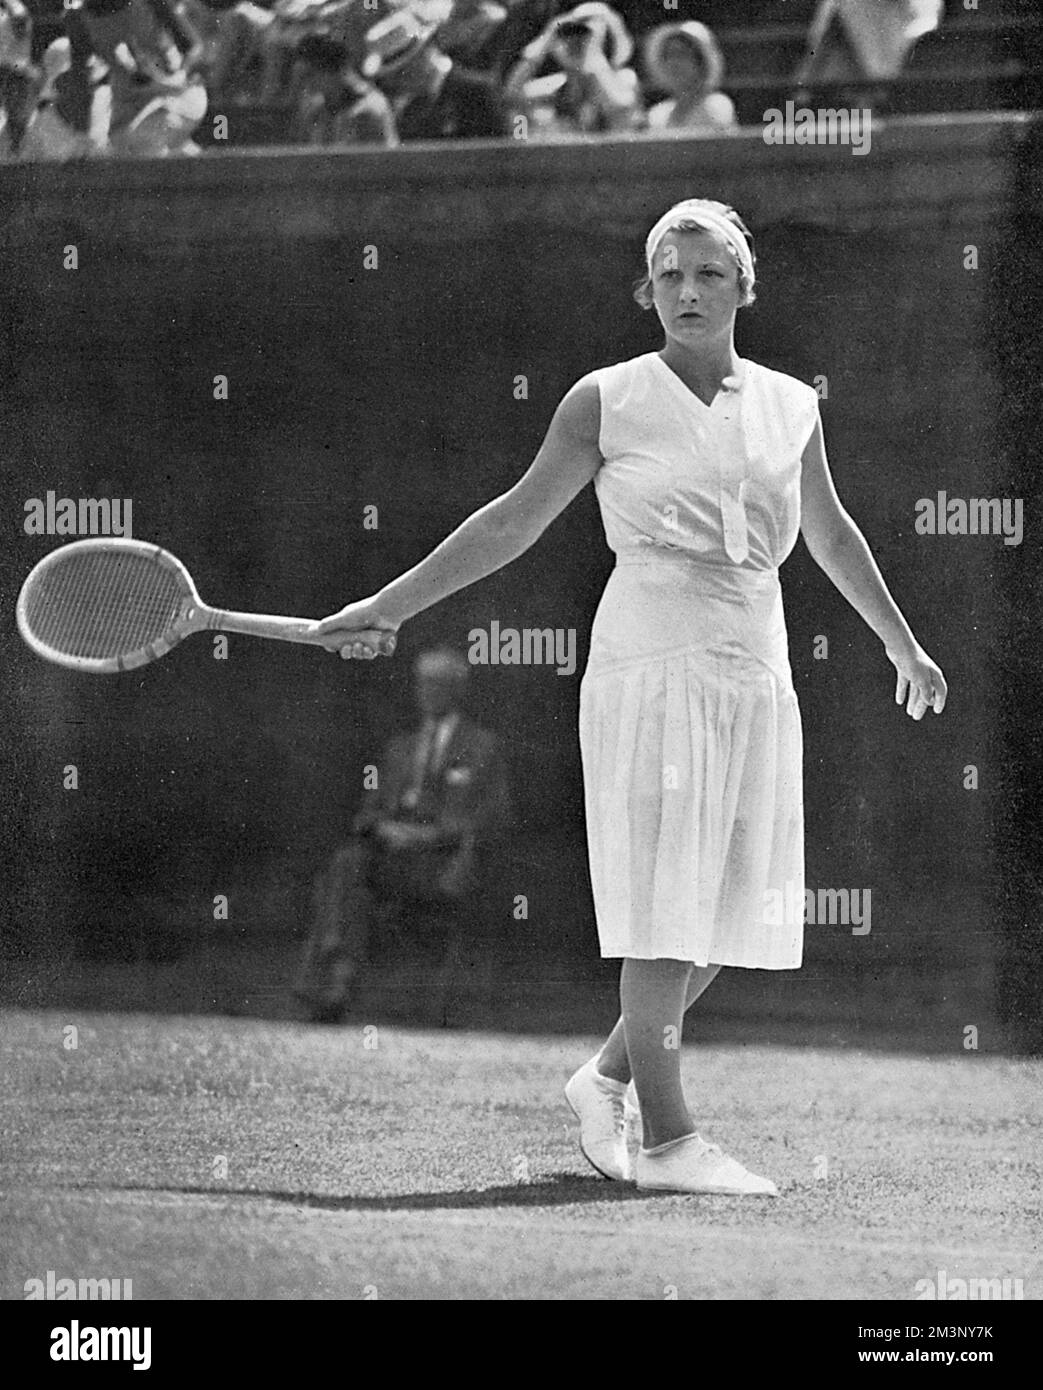 Helen Hull Jacobs (August 6, 1908  June 2, 1997), World No. 1 American female tennis player who won ten Grand Slam titles.  Pictured winning the final of the United States women's singles championship at Forest Hills in 1932.           Date: 1932 Stock Photo